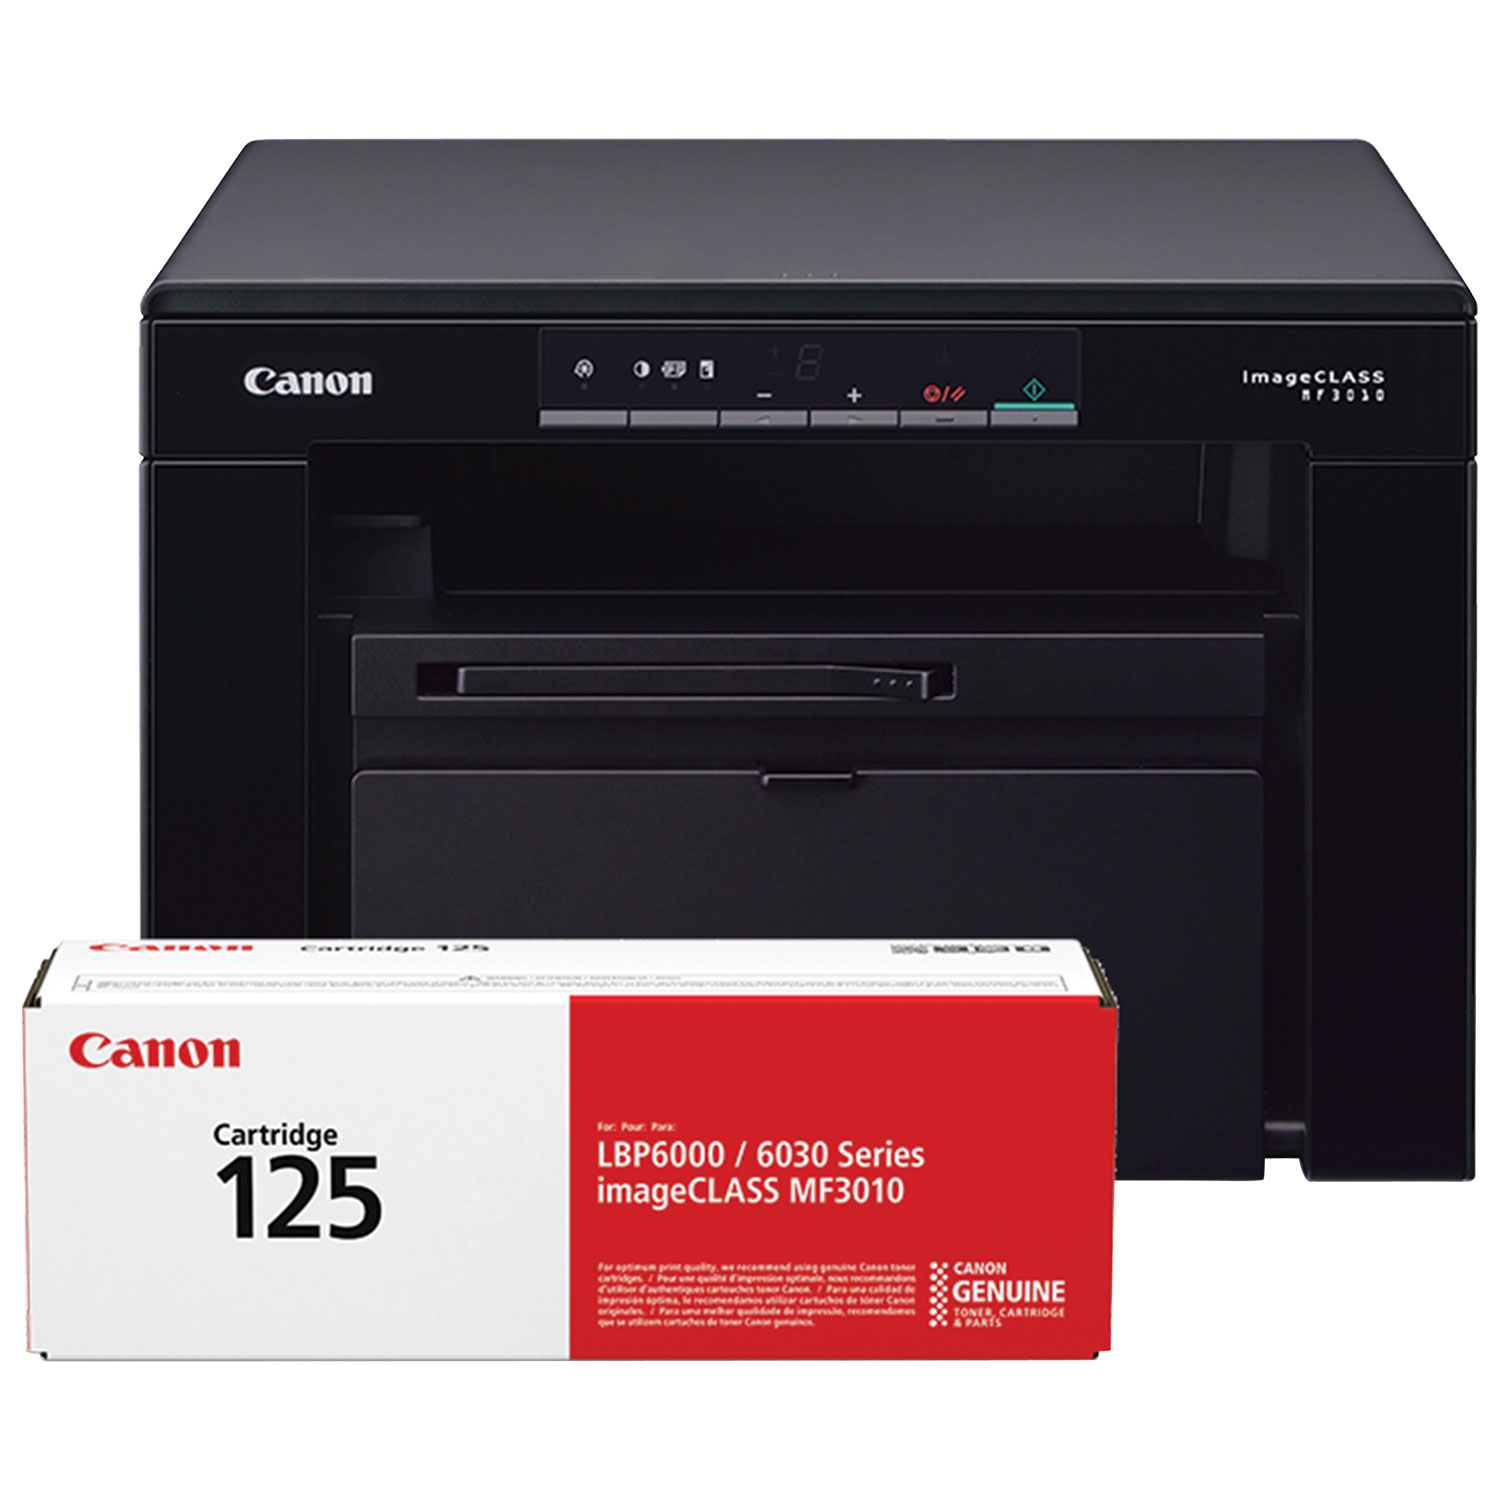 Canon imageClass MF3010 Monochrome All-In-One Laser Printer With Extra Toner Cartridge